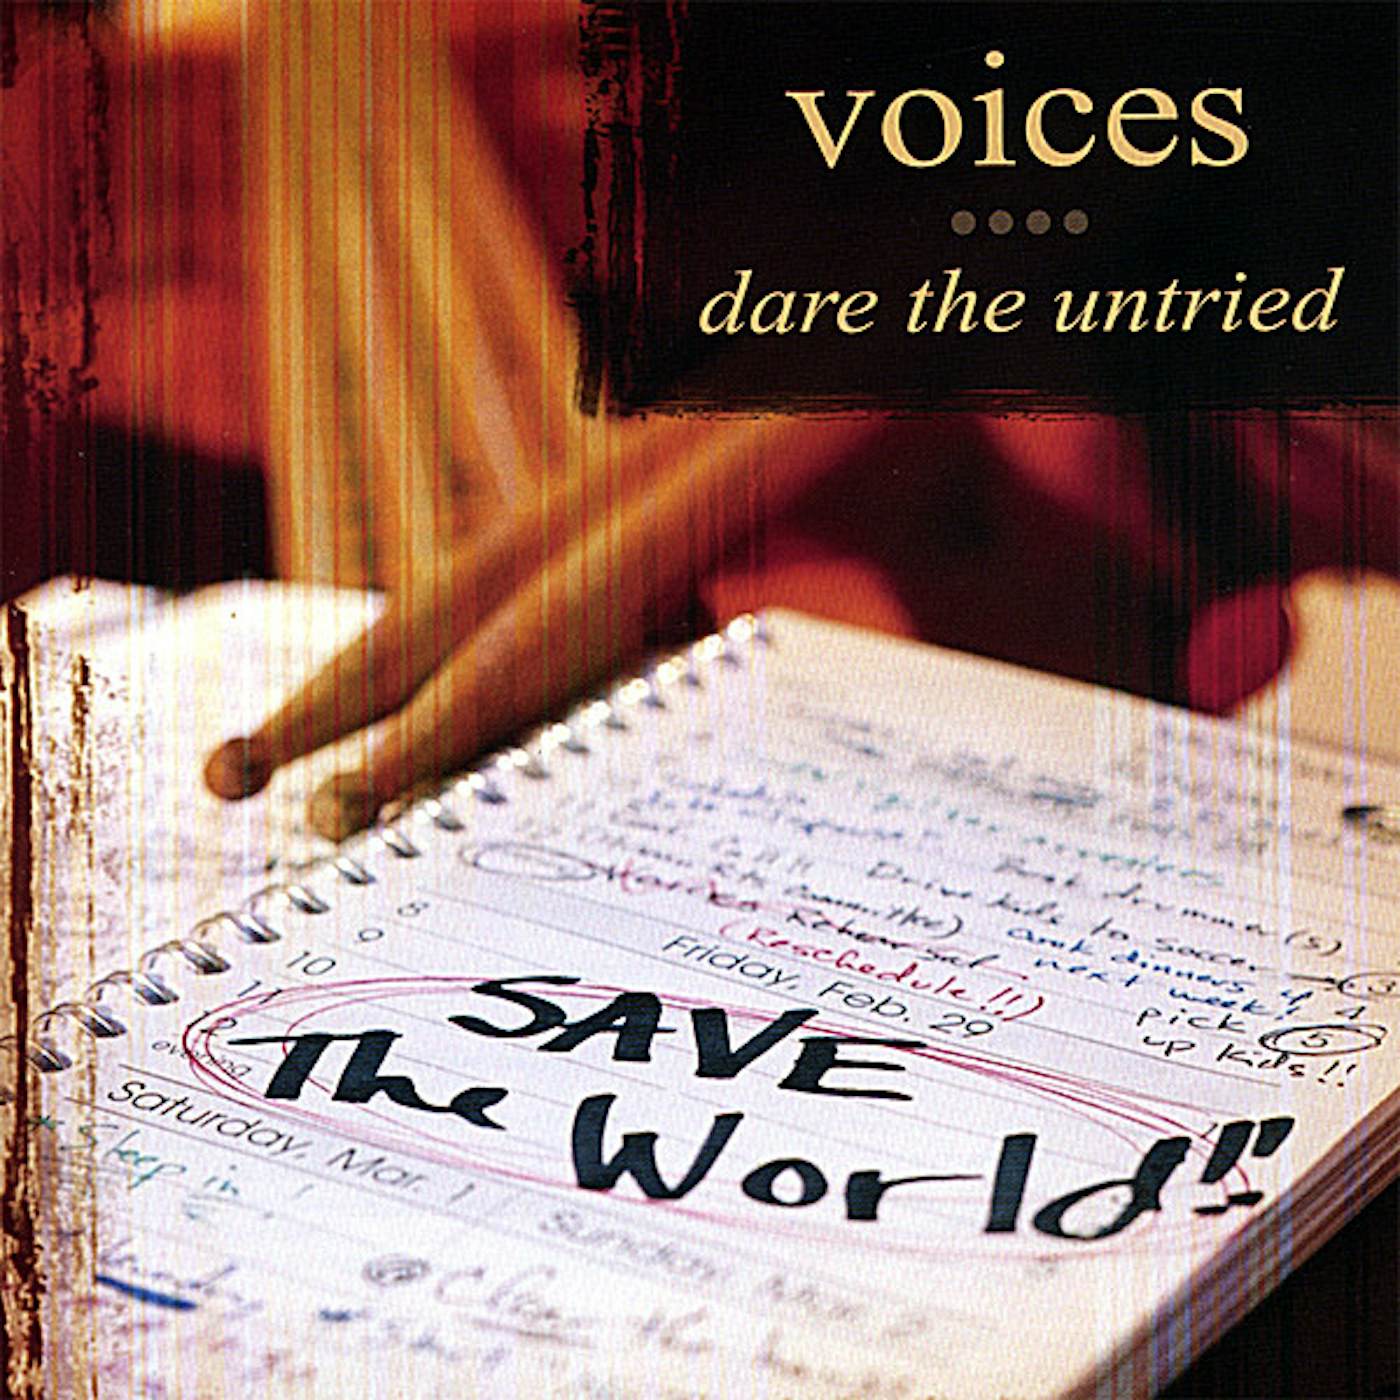 The Voices DARE THE UNTRIED CD